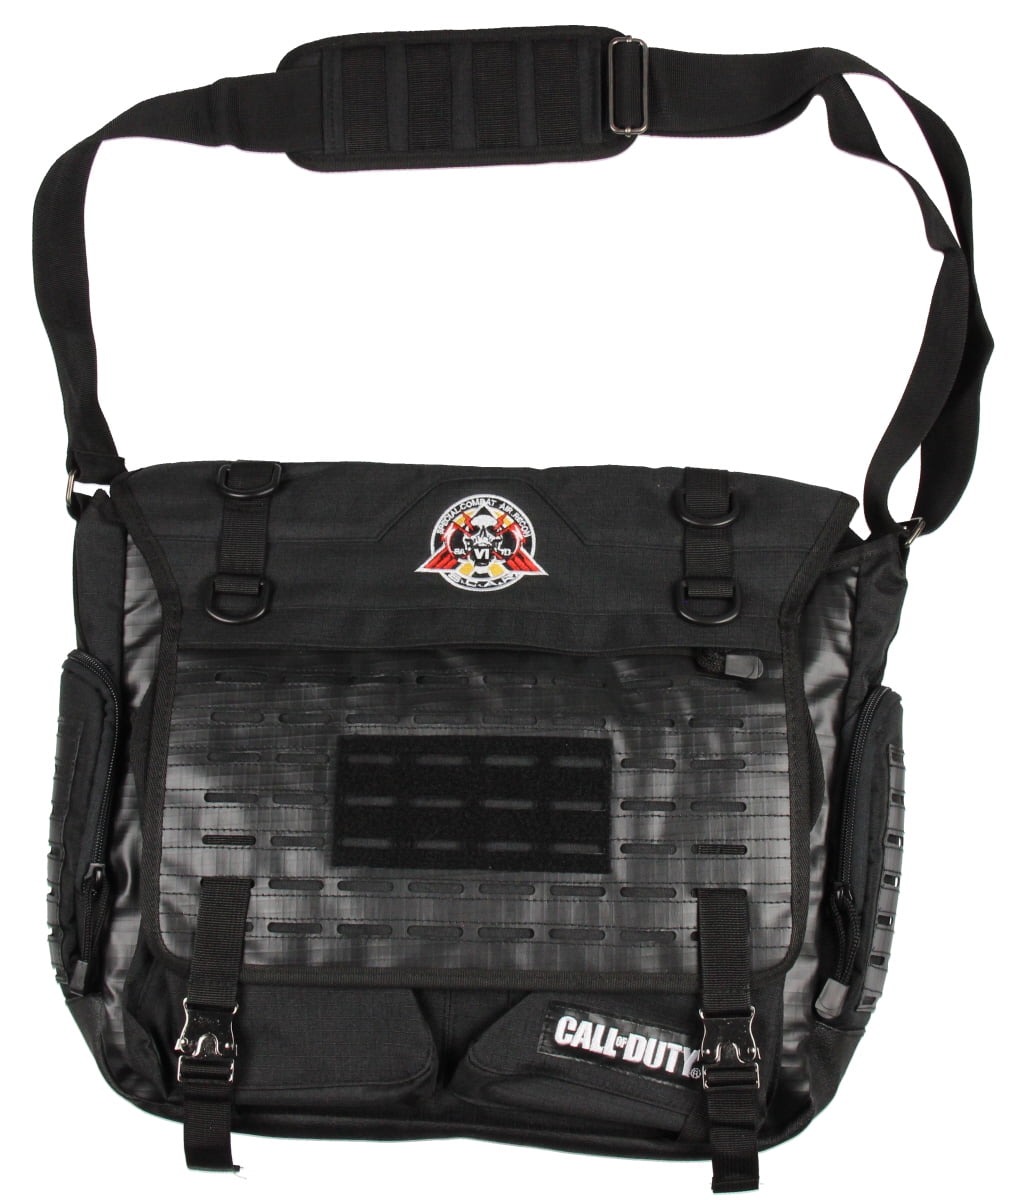 Call of Duty Convertible Military Backpack Messenger School Bag